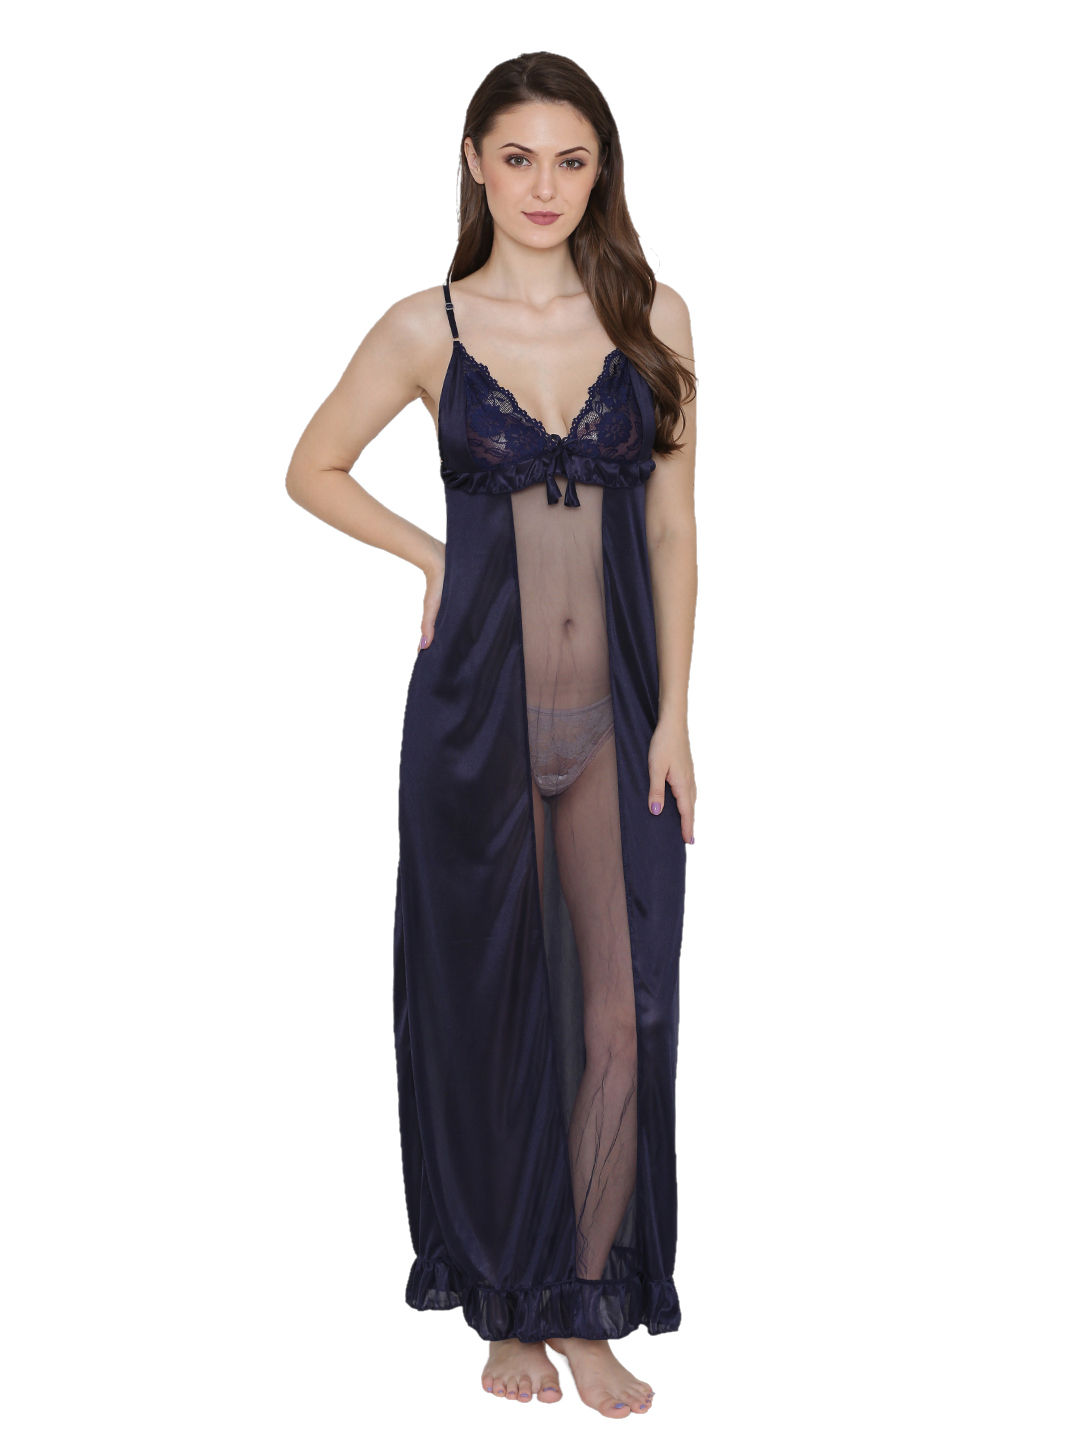 Swadesiblog.com - Best Sexy Night Dress for Women in India-Buyers Guide A  sexy nighty dress is suitable for single as well as committed women. Women,  who are living a single life, can